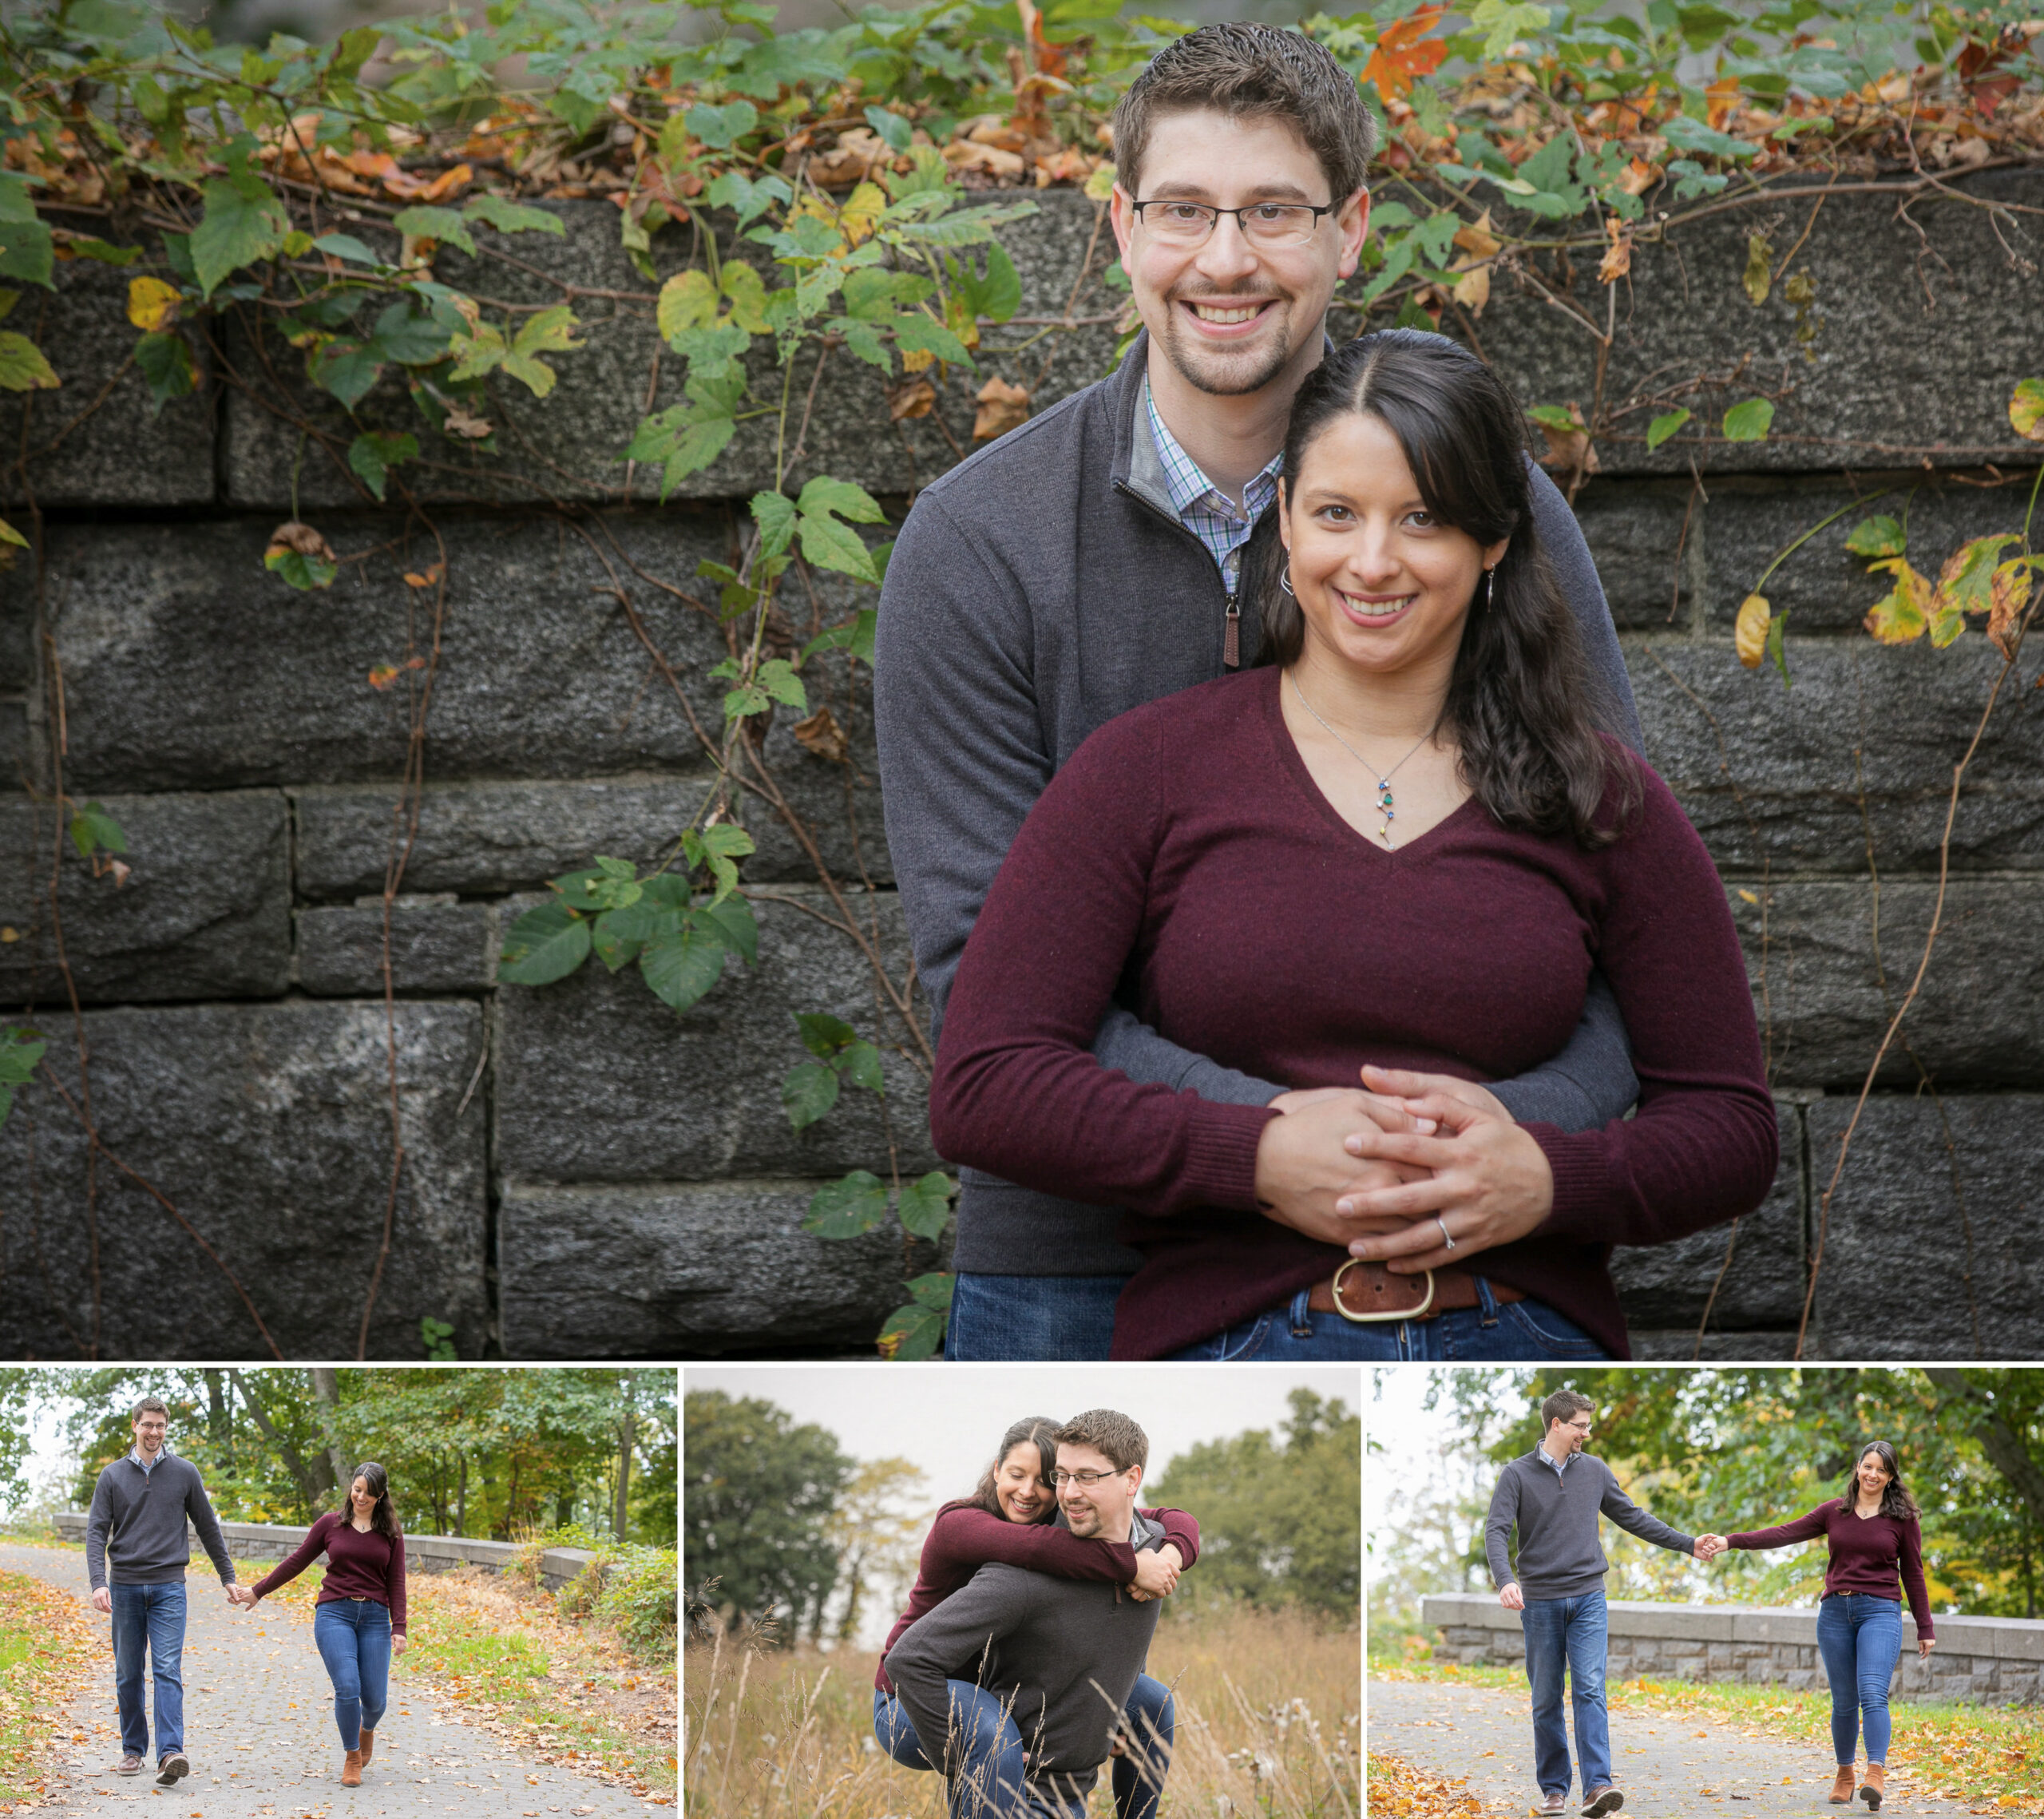 Hudson Valley Couple Taking Photos At Park